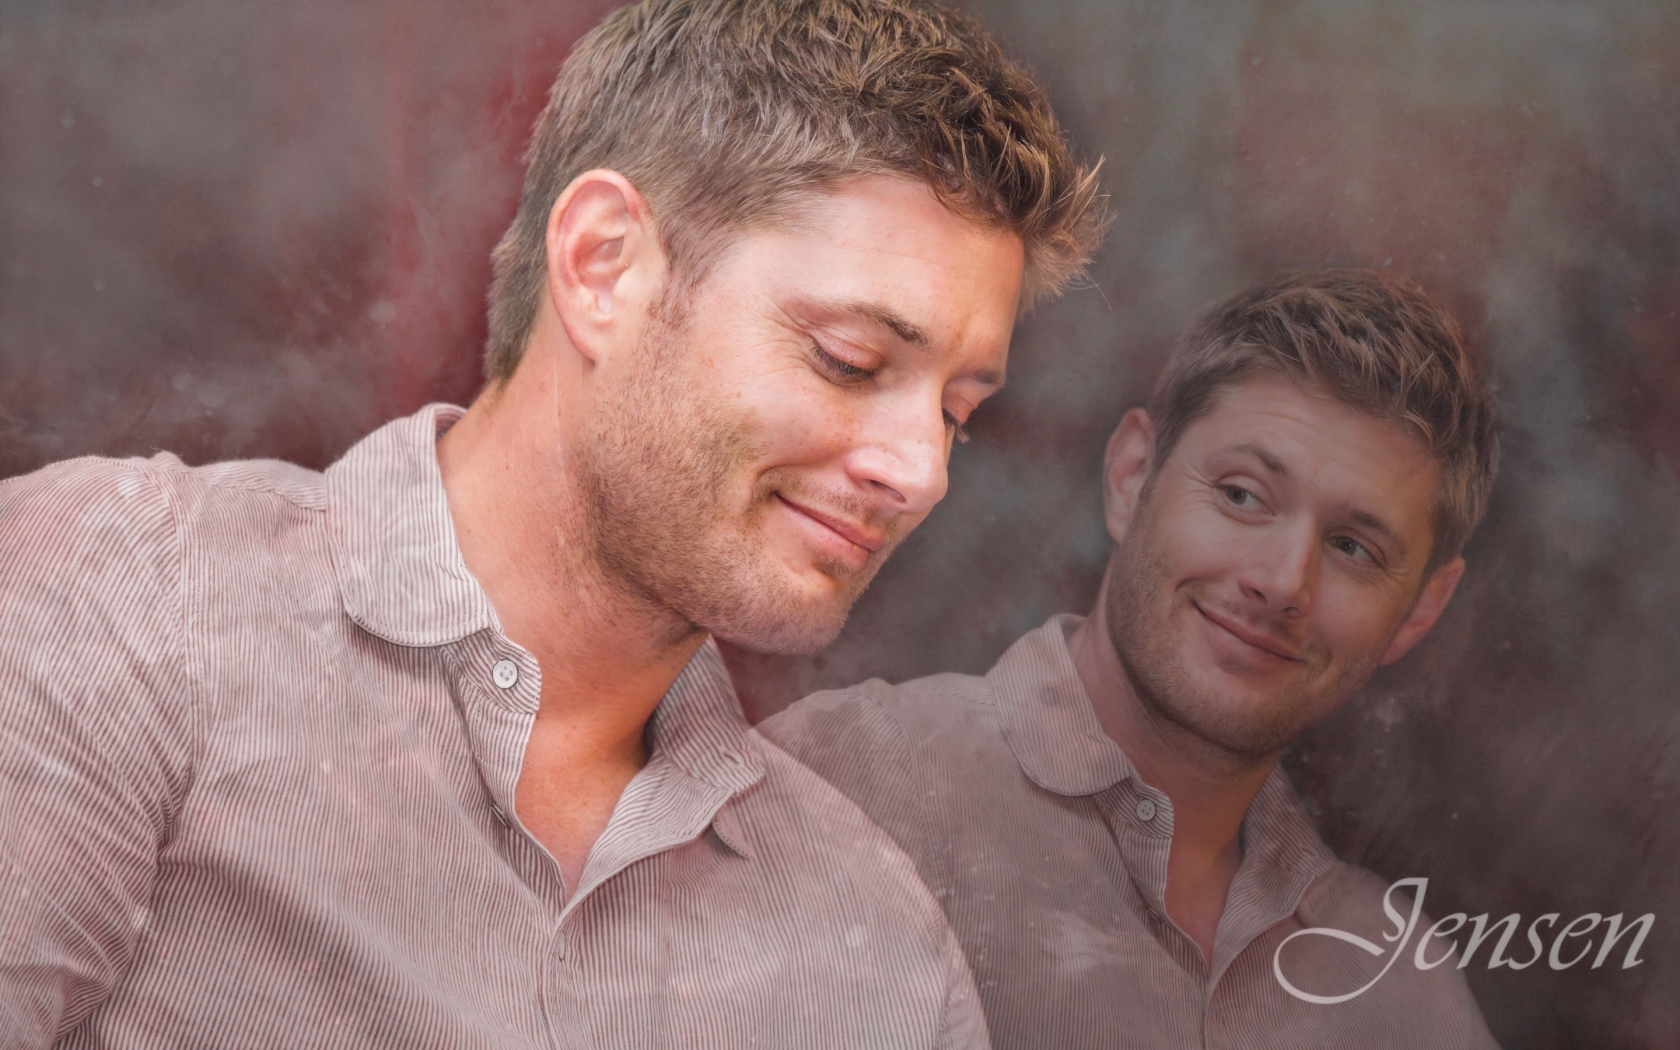 Jensen Ackles Cute Smile for 1680 x 1050 widescreen resolution